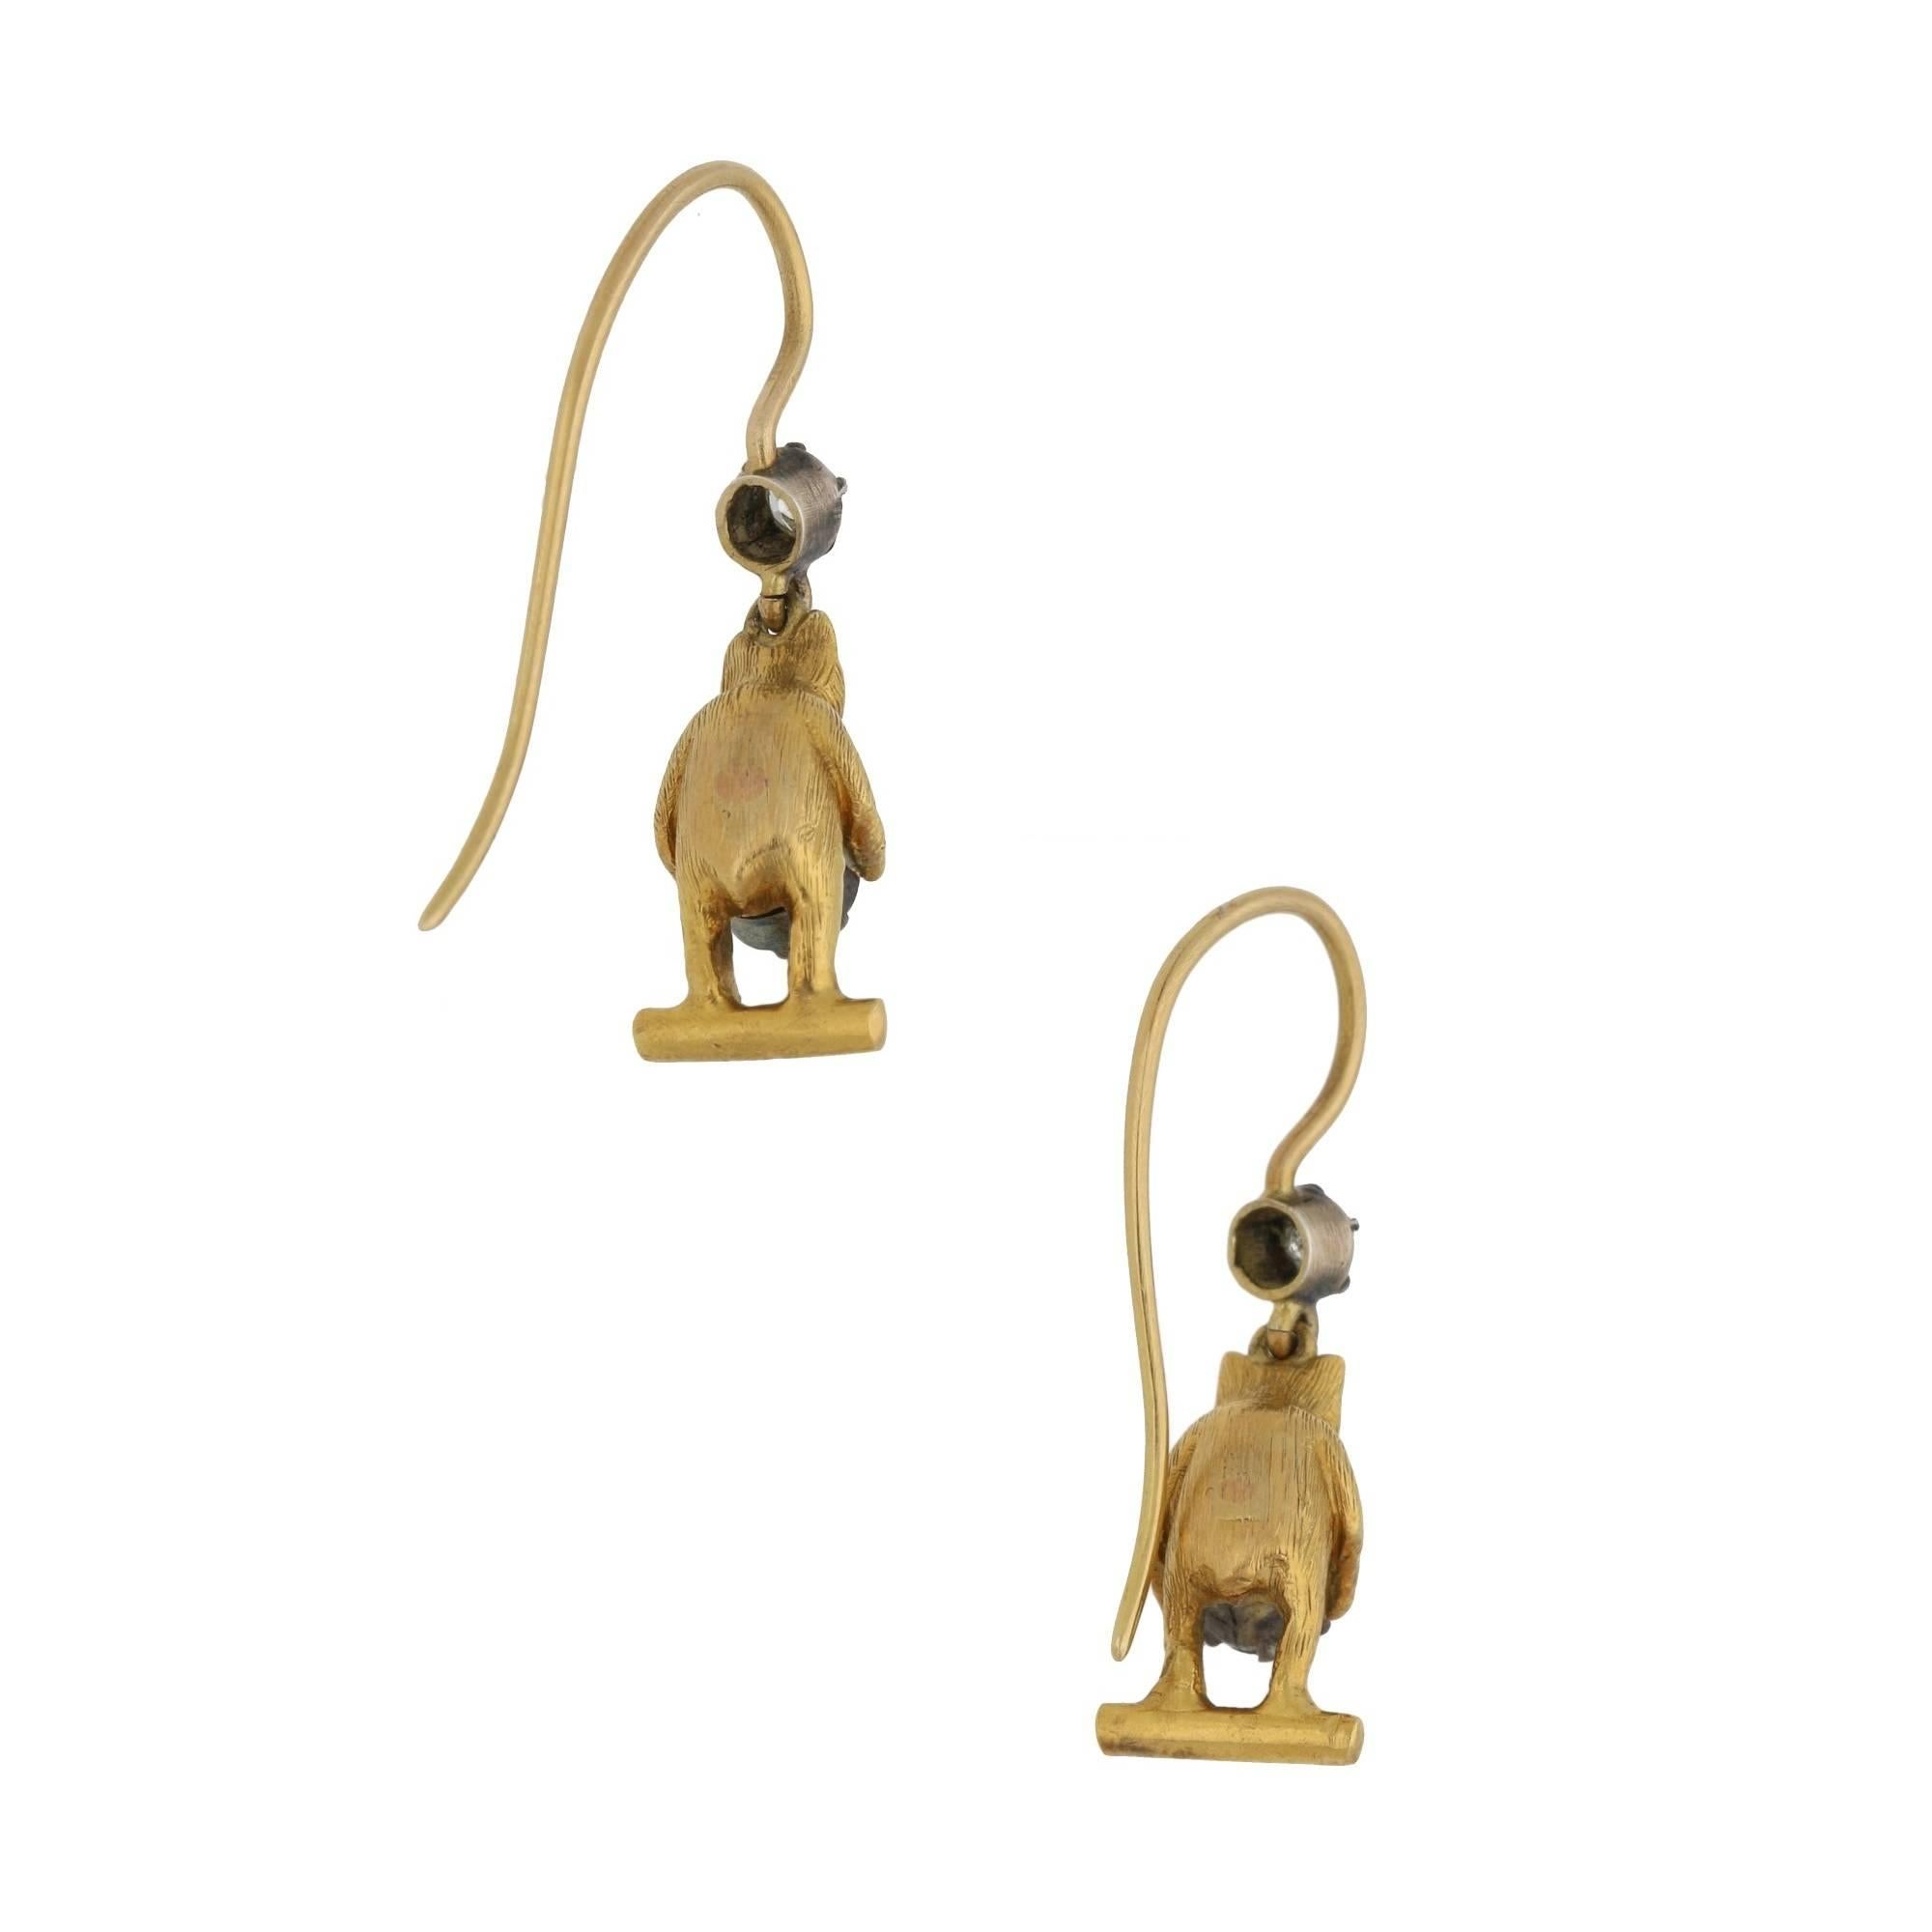 A beautiful pair of late Victorian bear drop earrings set in 15k yellow gold. The pair are beautifully hand-finished with brushed detailing to the face and body and each hold a single old European cut diamond in their paws. Furthermore, each bear is